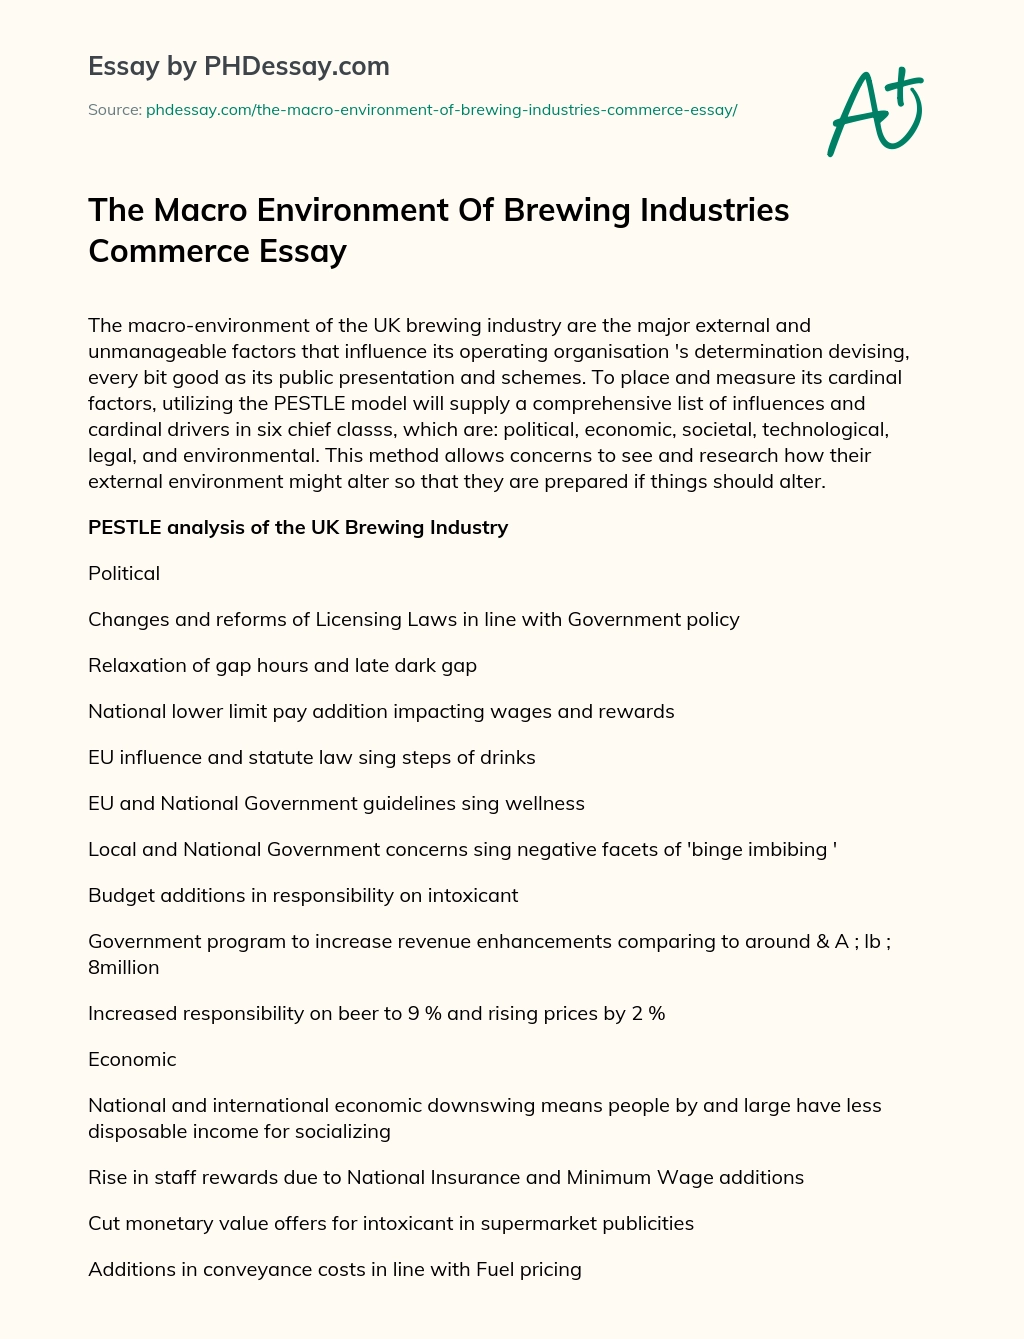 The Macro Environment Of Brewing Industries Commerce Essay essay